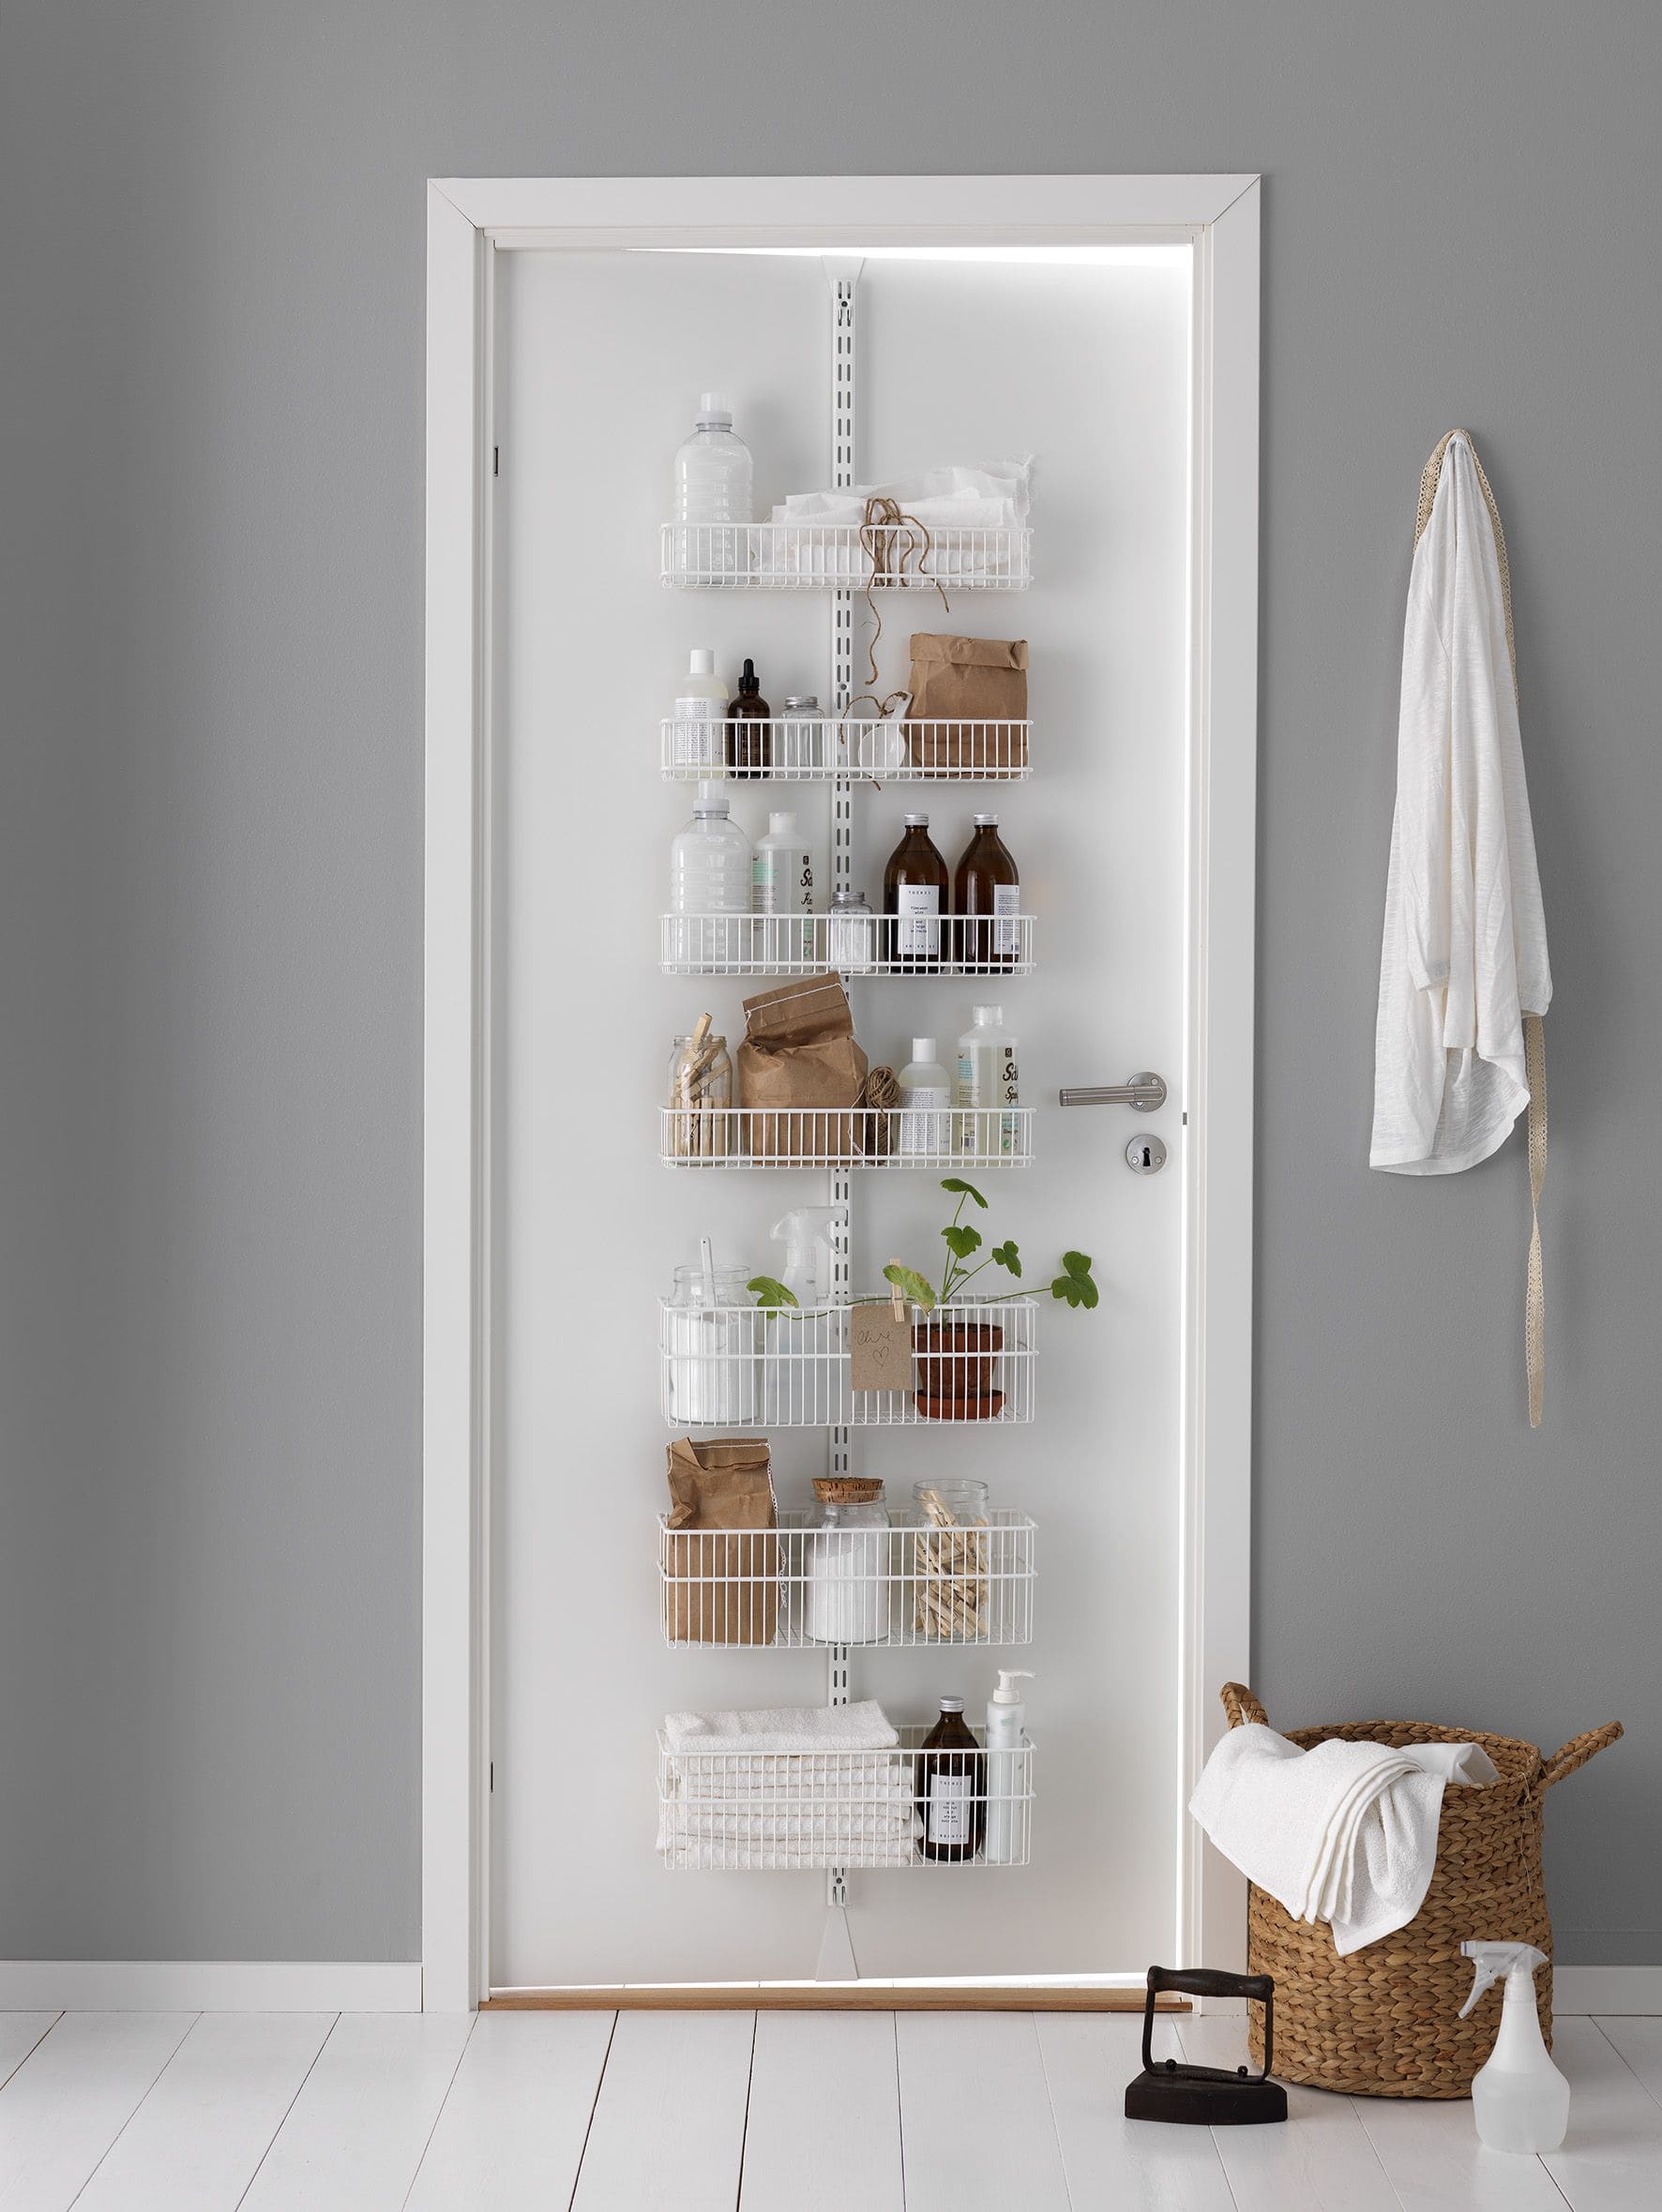 20 fascinating over the door storage ideas to put in your bag - 147